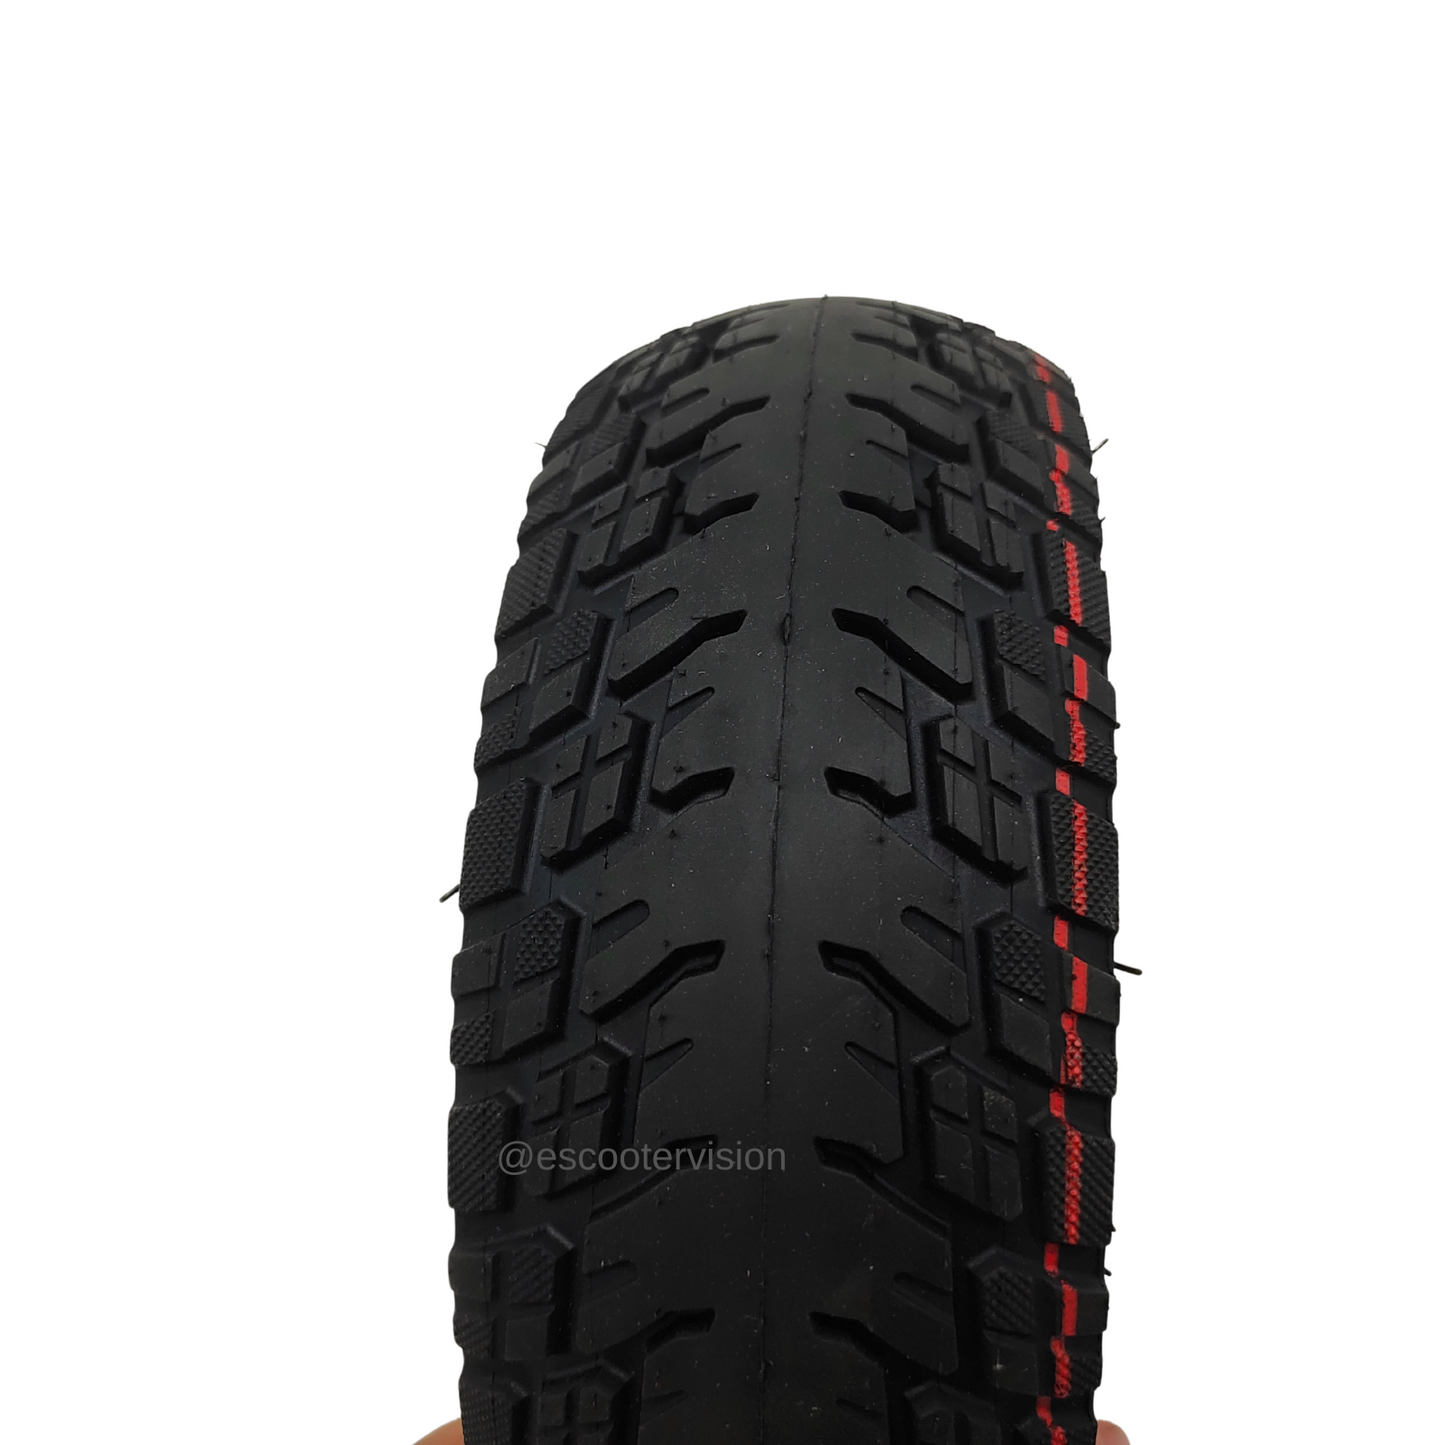 Band 9.5x2.5 tubeless voor Niu KQi3 Sport Pro Max vervanging